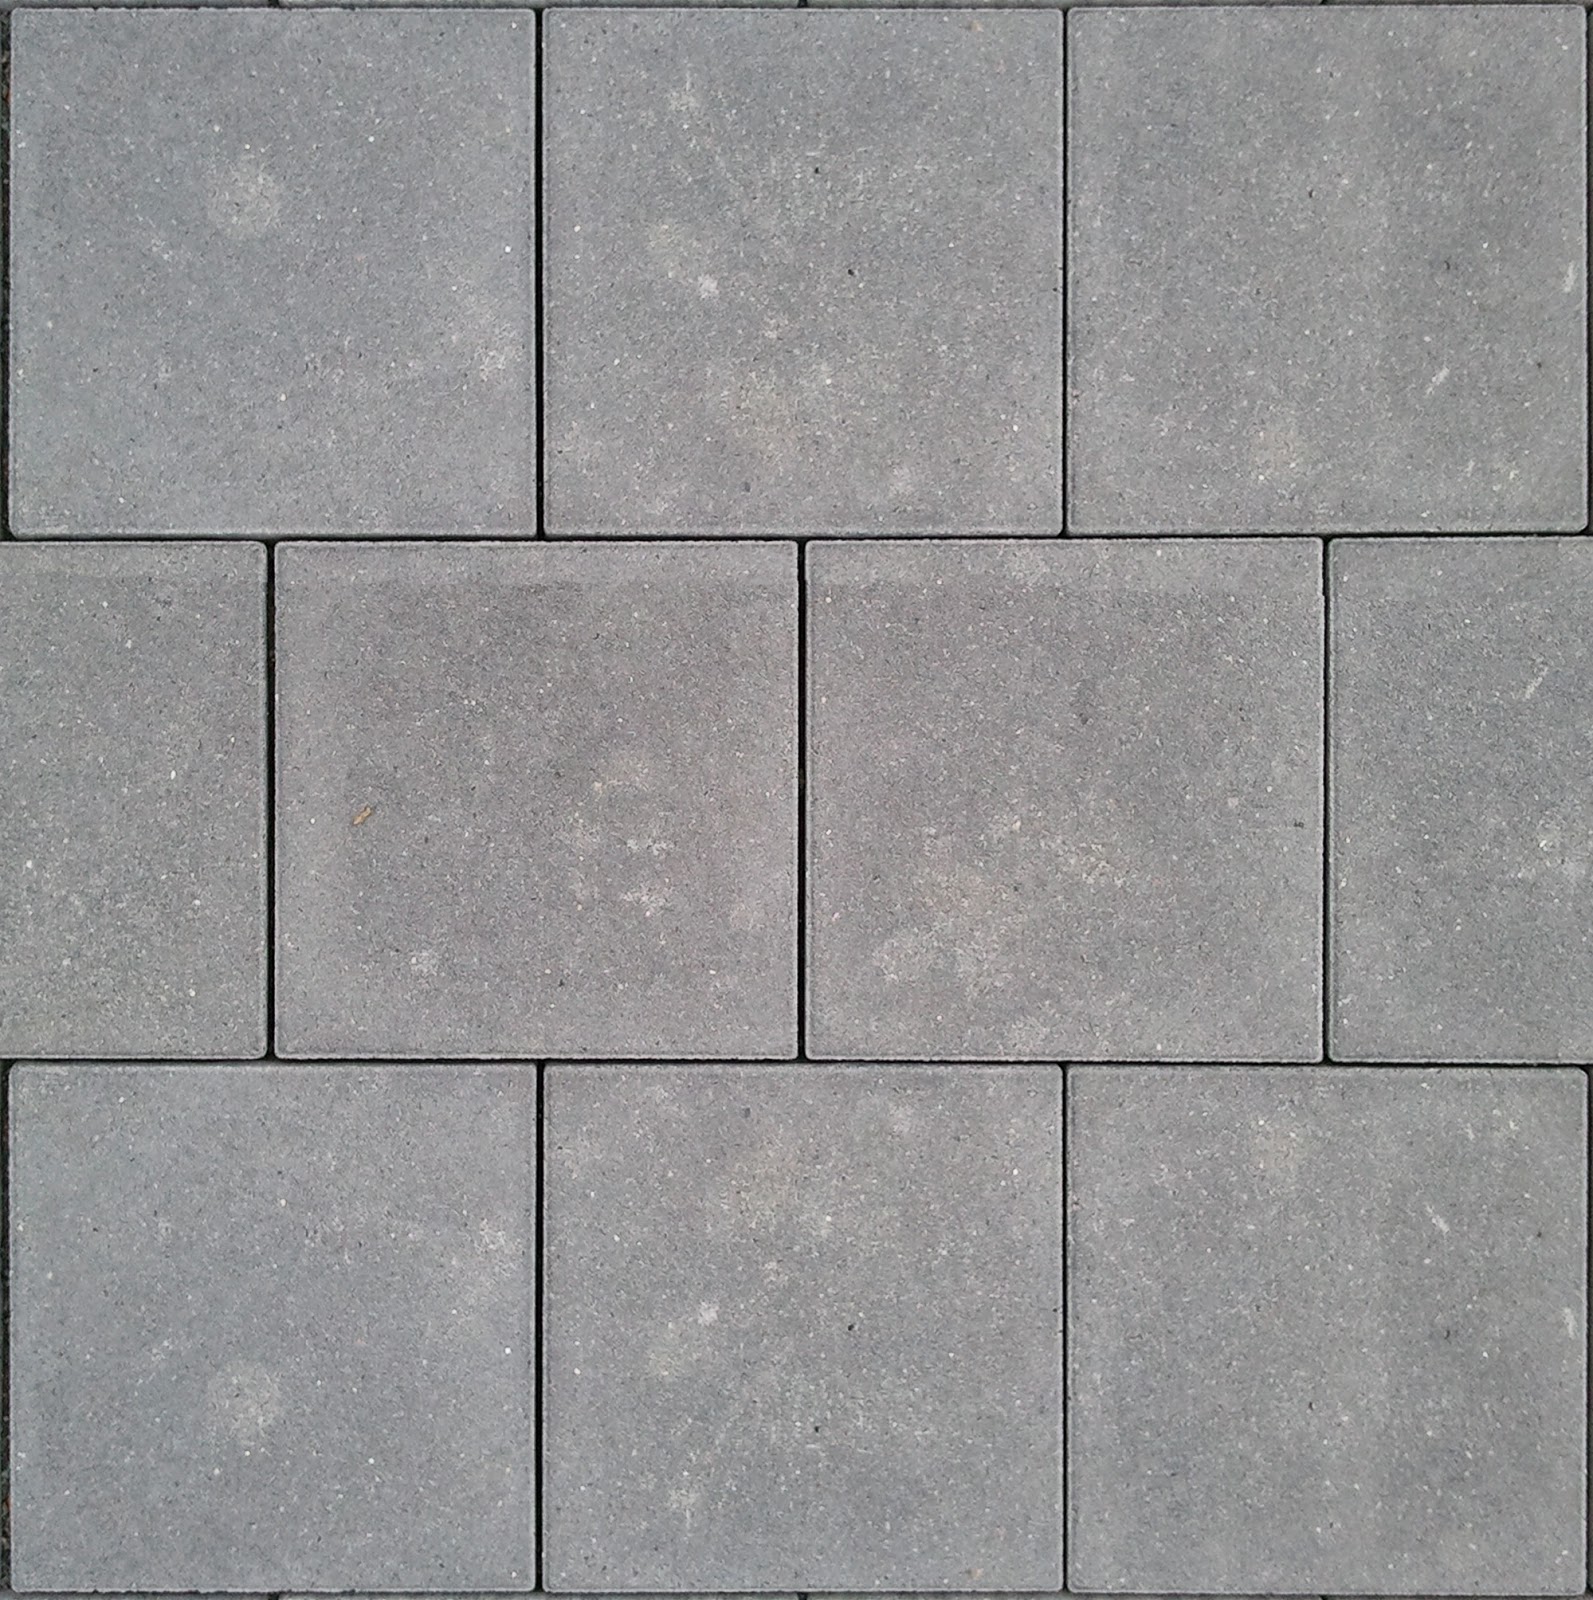 Free Textures and images: Texture of Gray Seamless Concrete Pavement